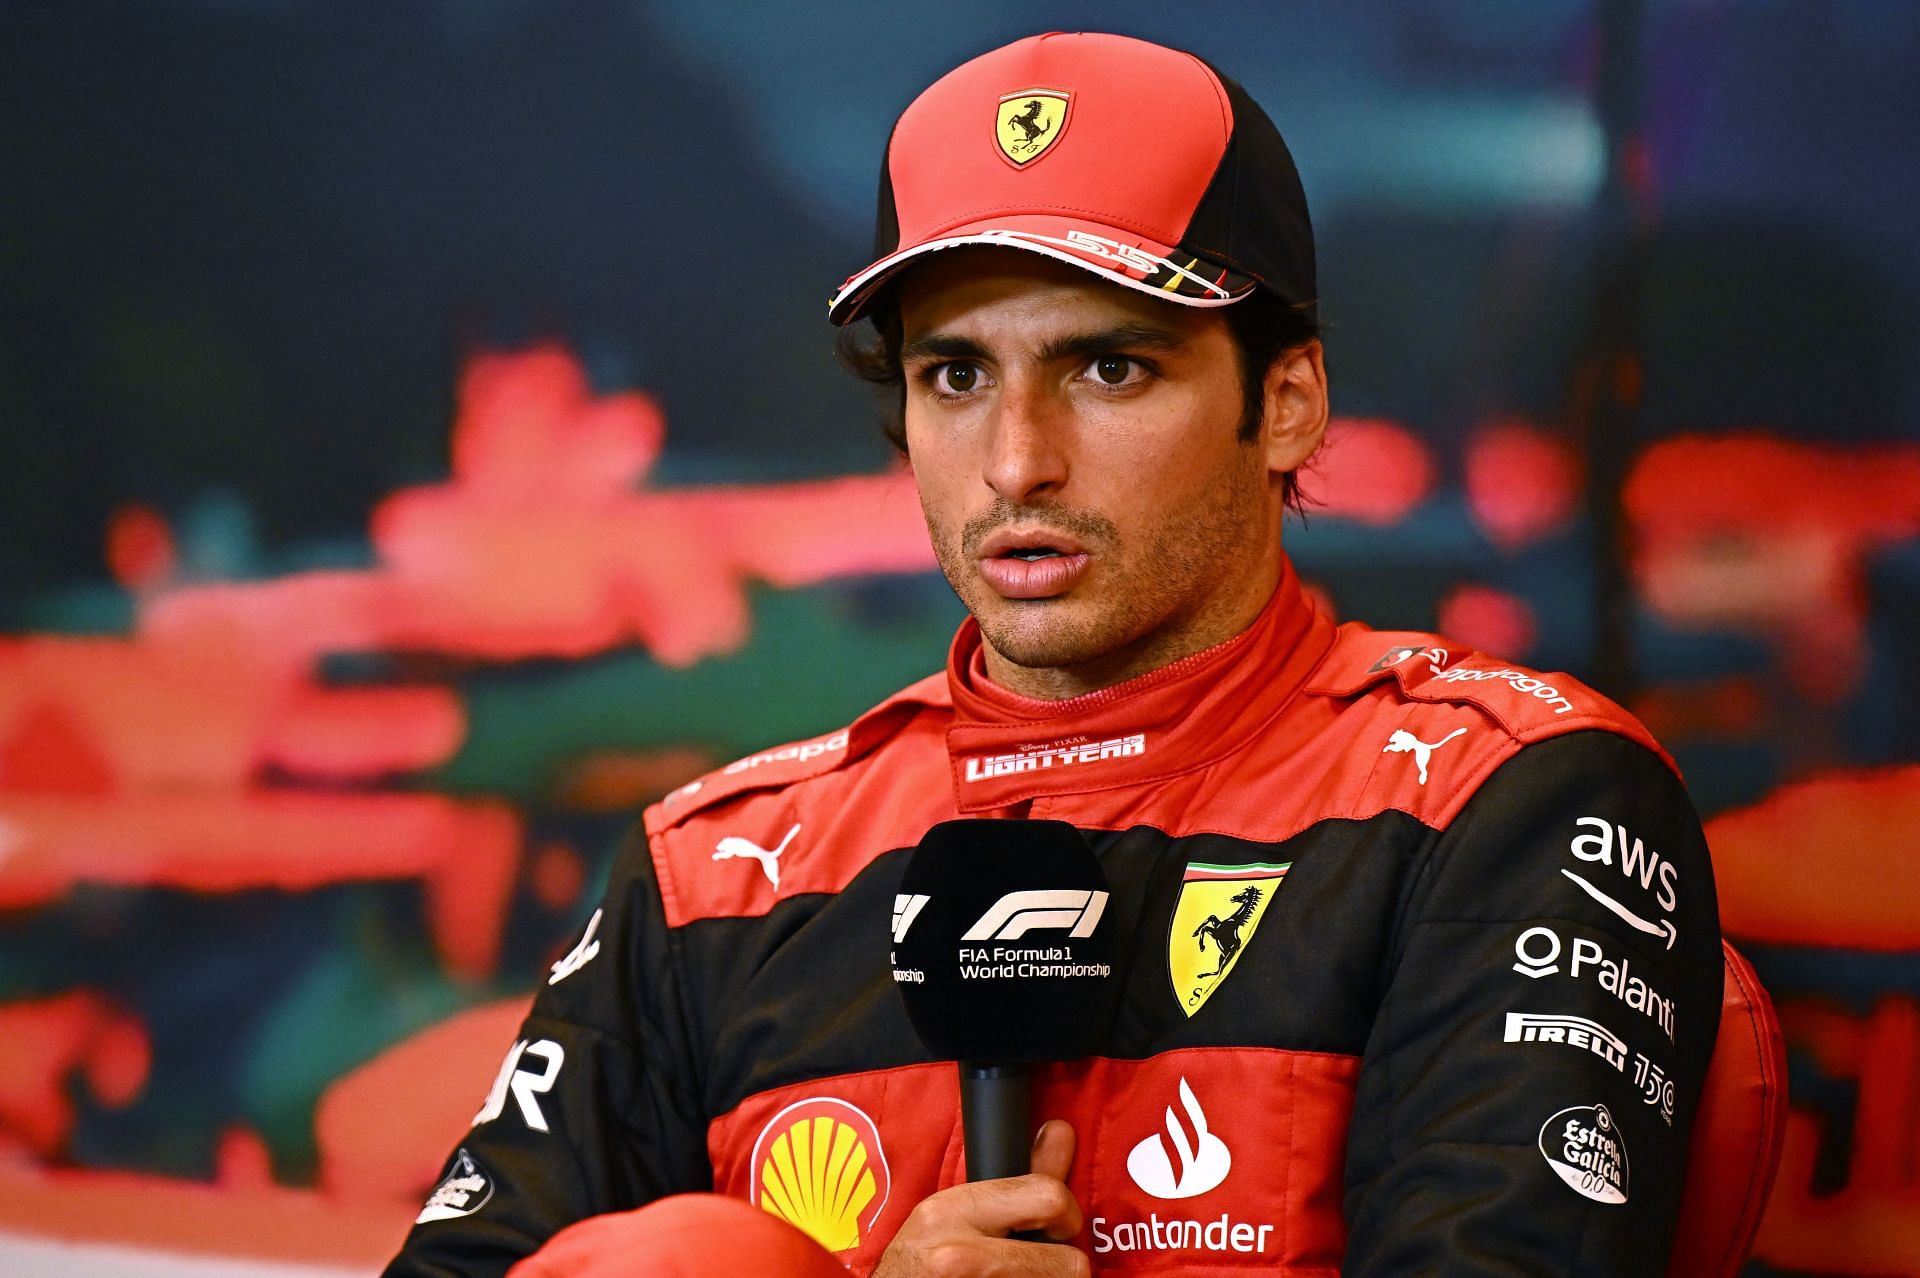 Carlos Sainz talks in the press conference after the 2022 F1 Grand Prix of Monaco (Photo by Clive Mason/Getty Images